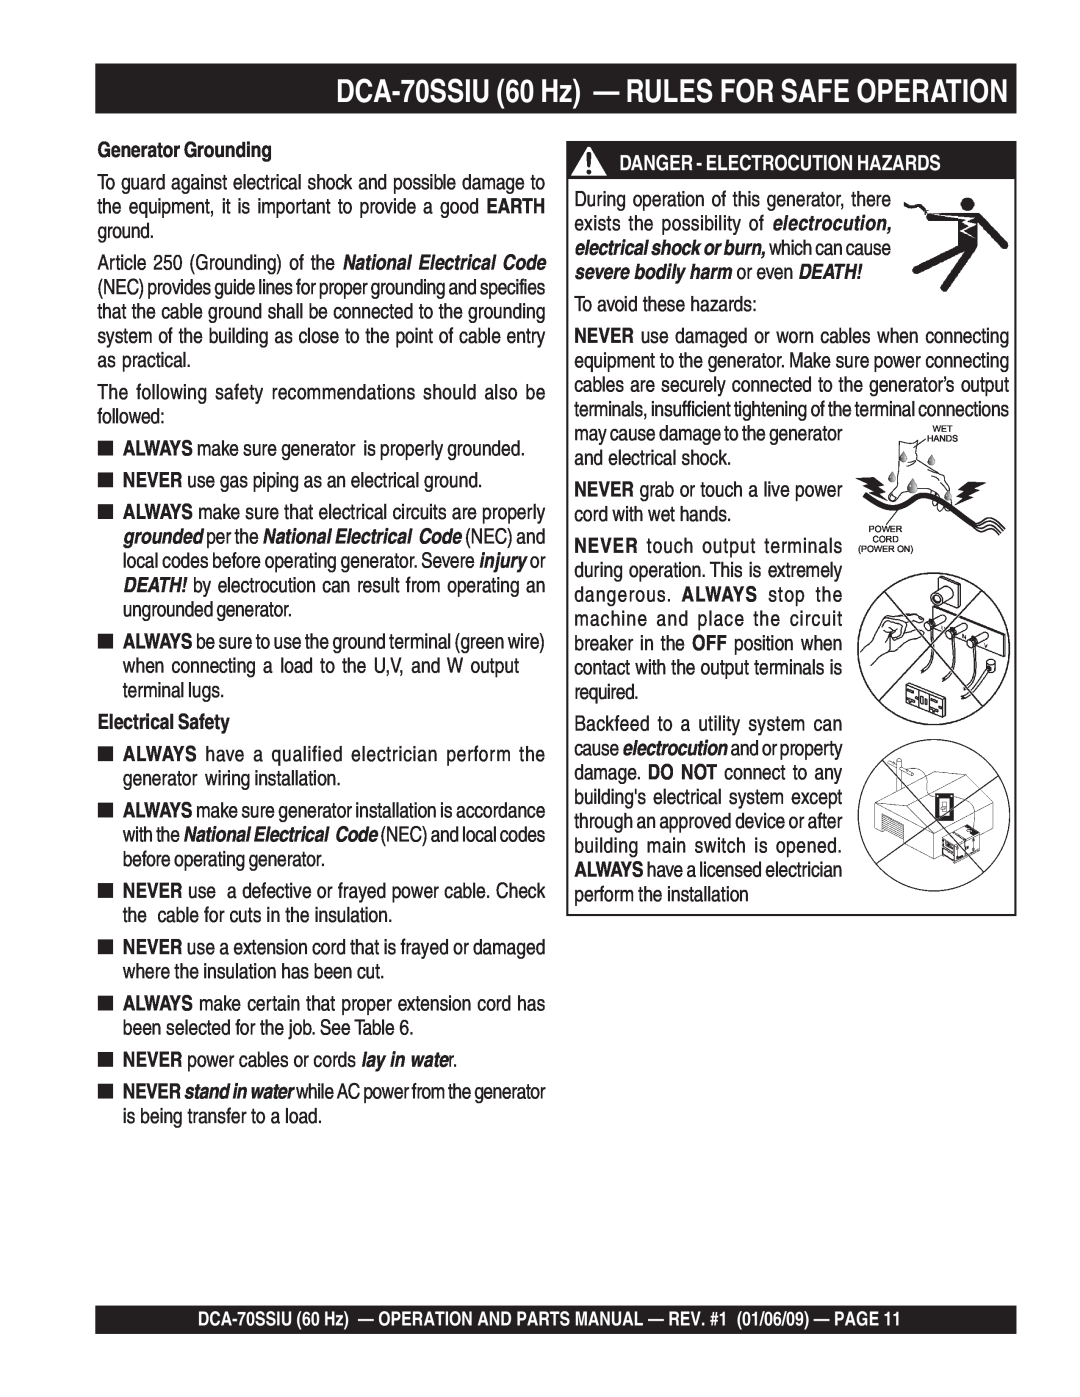 Multiquip M2870300504 operation manual DCA-70SSIU 60 Hz - RULES FOR SAFE OPERATION, Generator Grounding, Electrical Safety 